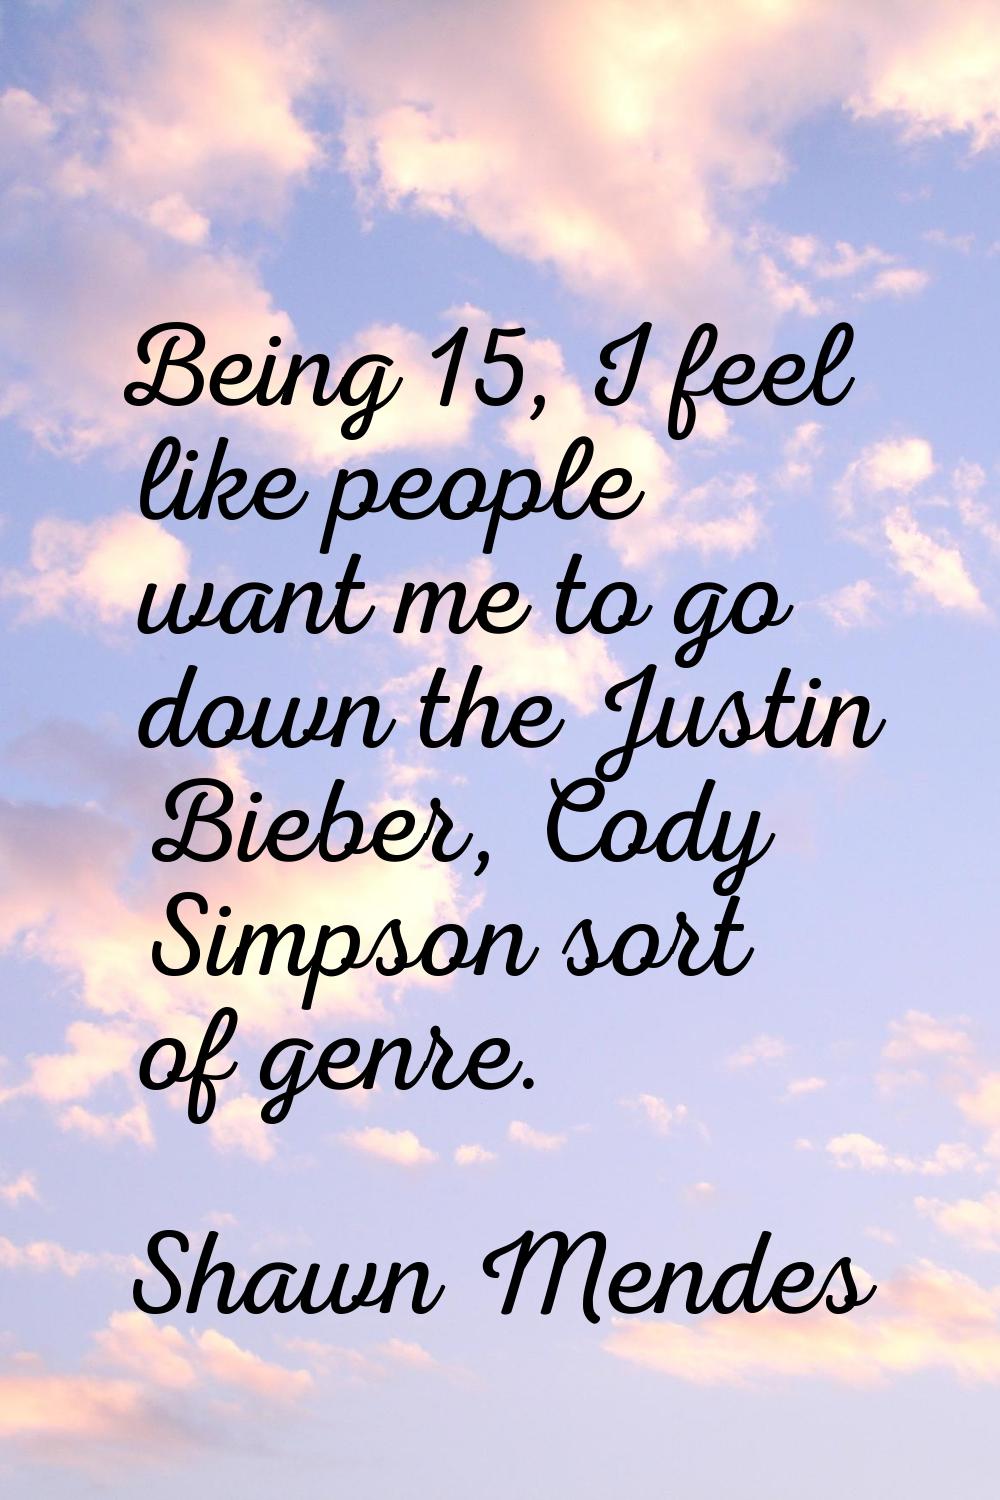 Being 15, I feel like people want me to go down the Justin Bieber, Cody Simpson sort of genre.